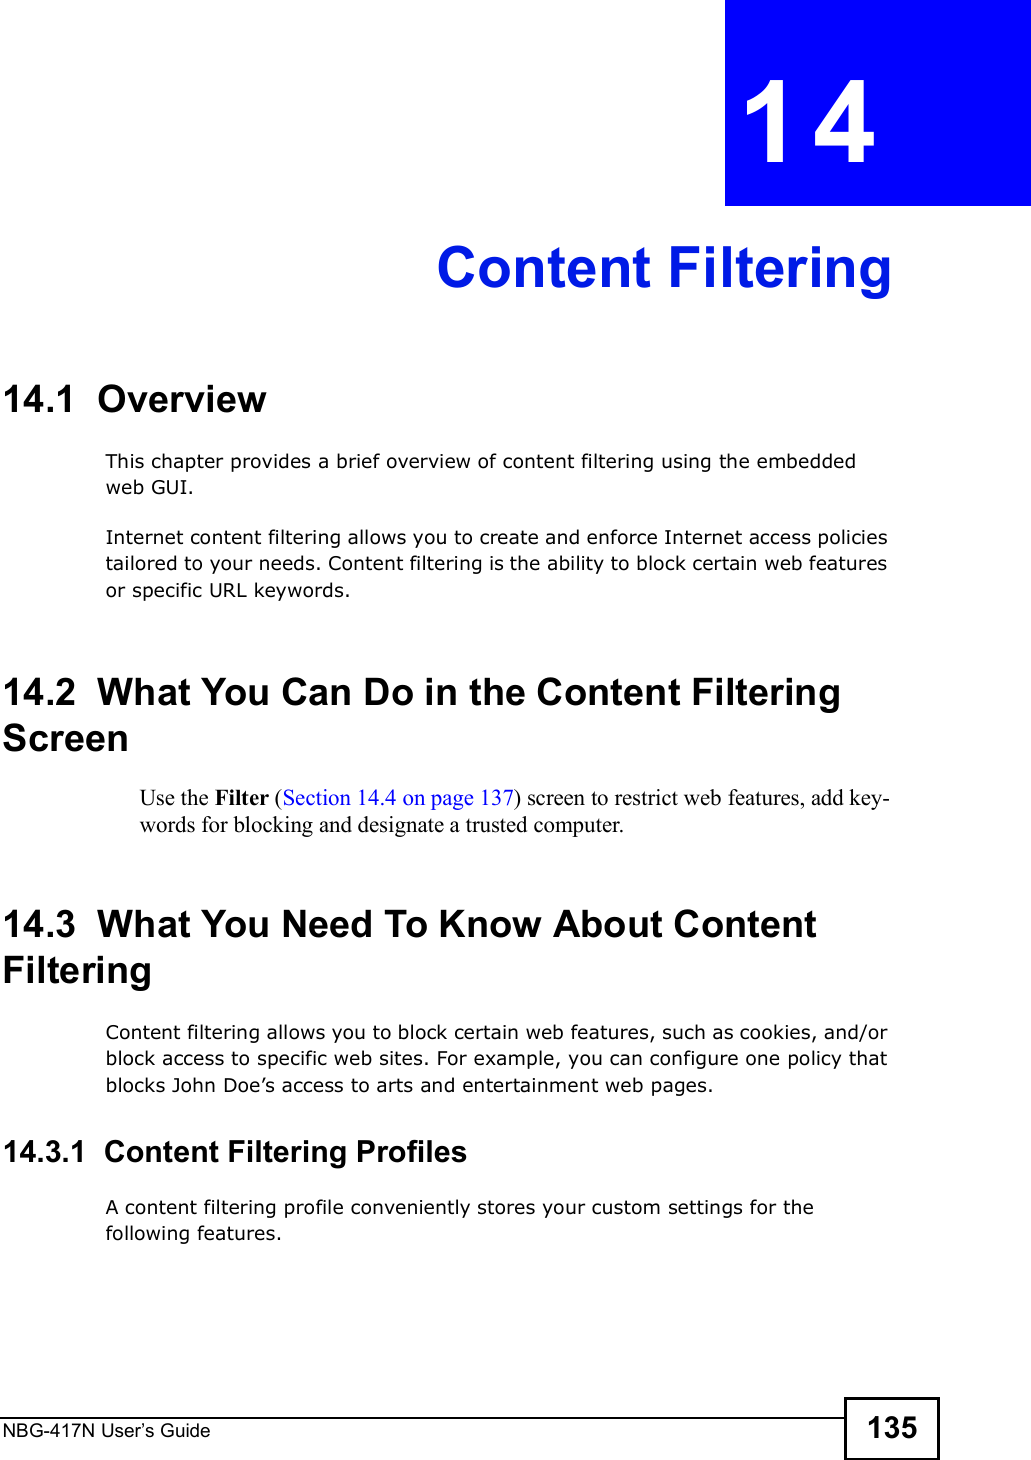 NBG-417N User s Guide 135CHAPTER  14 Content Filtering14.1  OverviewThis chapter provides a brief overview of content filtering using the embedded web GUI.Internet content filtering allows you to create and enforce Internet access policies tailored to your needs. Content filtering is the ability to block certain web features or specific URL keywords.14.2  What You Can Do in the Content Filtering ScreenUse the Filter (Section 14.4 on page 137) screen to restrict web features, add key-words for blocking and designate a trusted computer.14.3  What You Need To Know About Content FilteringContent filtering allows you to block certain web features, such as cookies, and/or block access to specific web sites. For example, you can configure one policy that blocks John Doe!s access to arts and entertainment web pages.14.3.1  Content Filtering ProfilesA content filtering profile conveniently stores your custom settings for the following features.